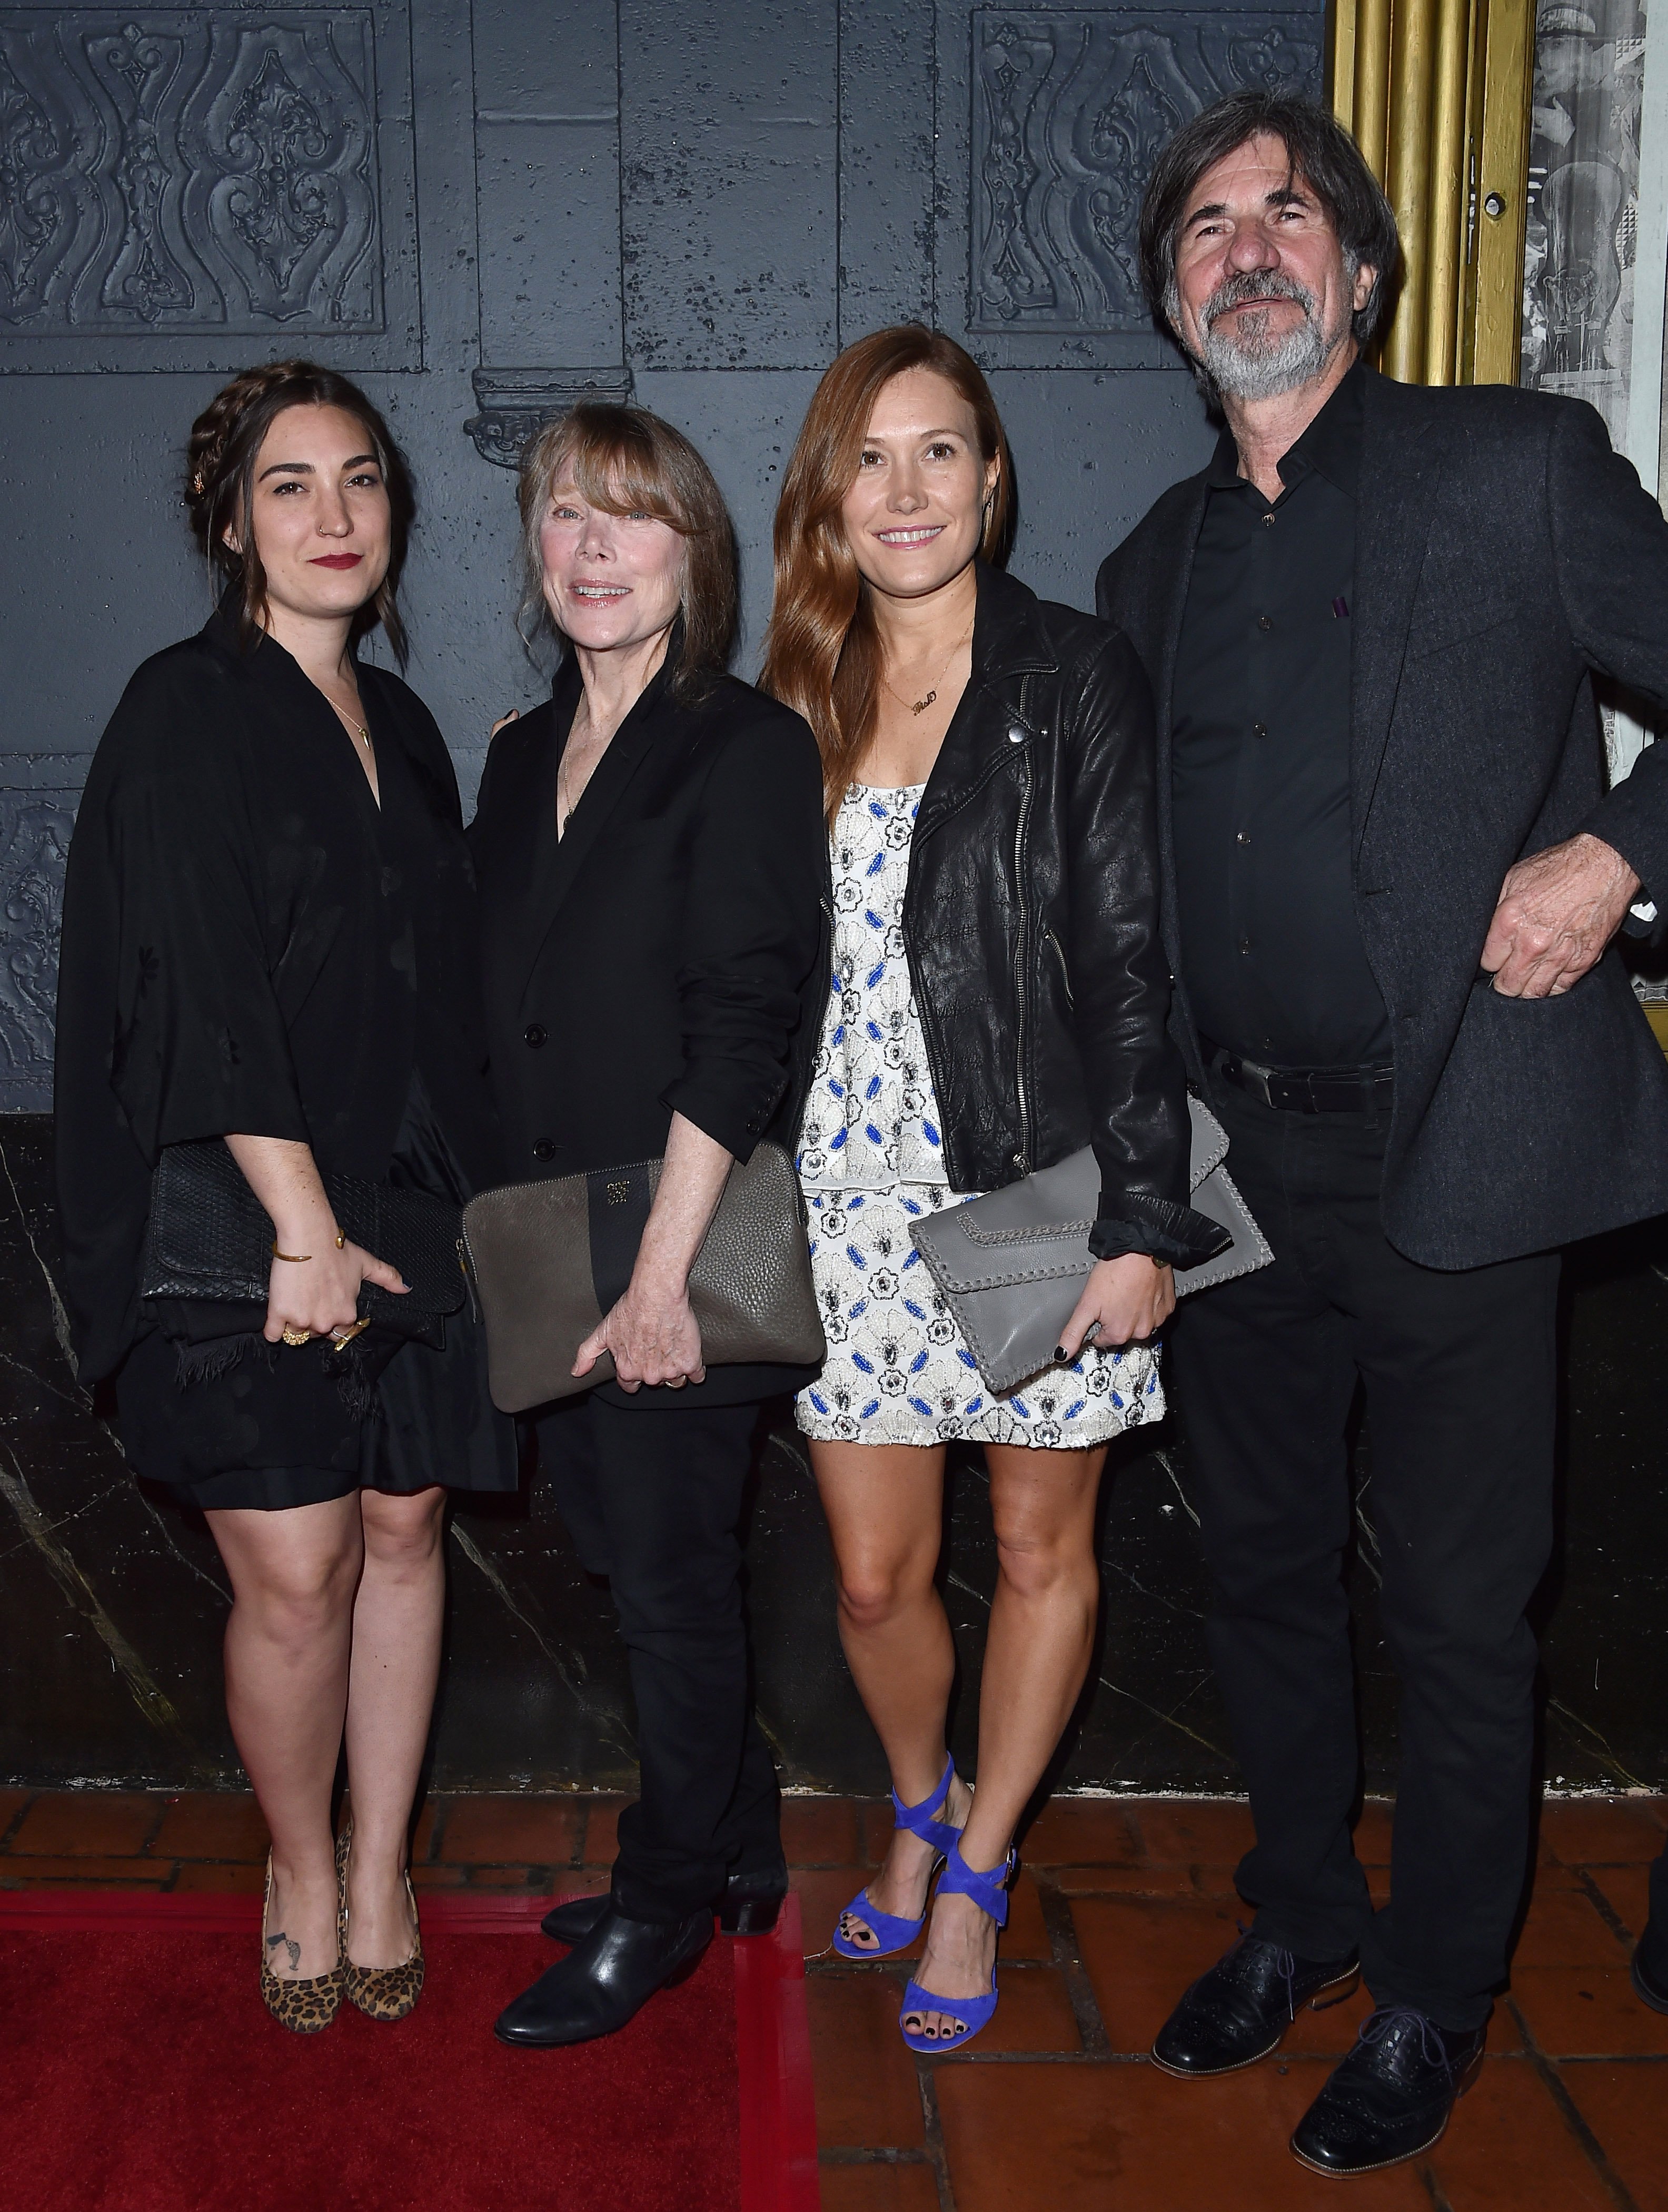 Actors Madison Fisk, Sissy Spacek, Schuyler Fisk and film production designer Jack Fisk arrive at the premiere of Broad Green Pictures' "Knight Of Cups" on March 1, 2016 in Los Angeles, California | Source: Getty Images